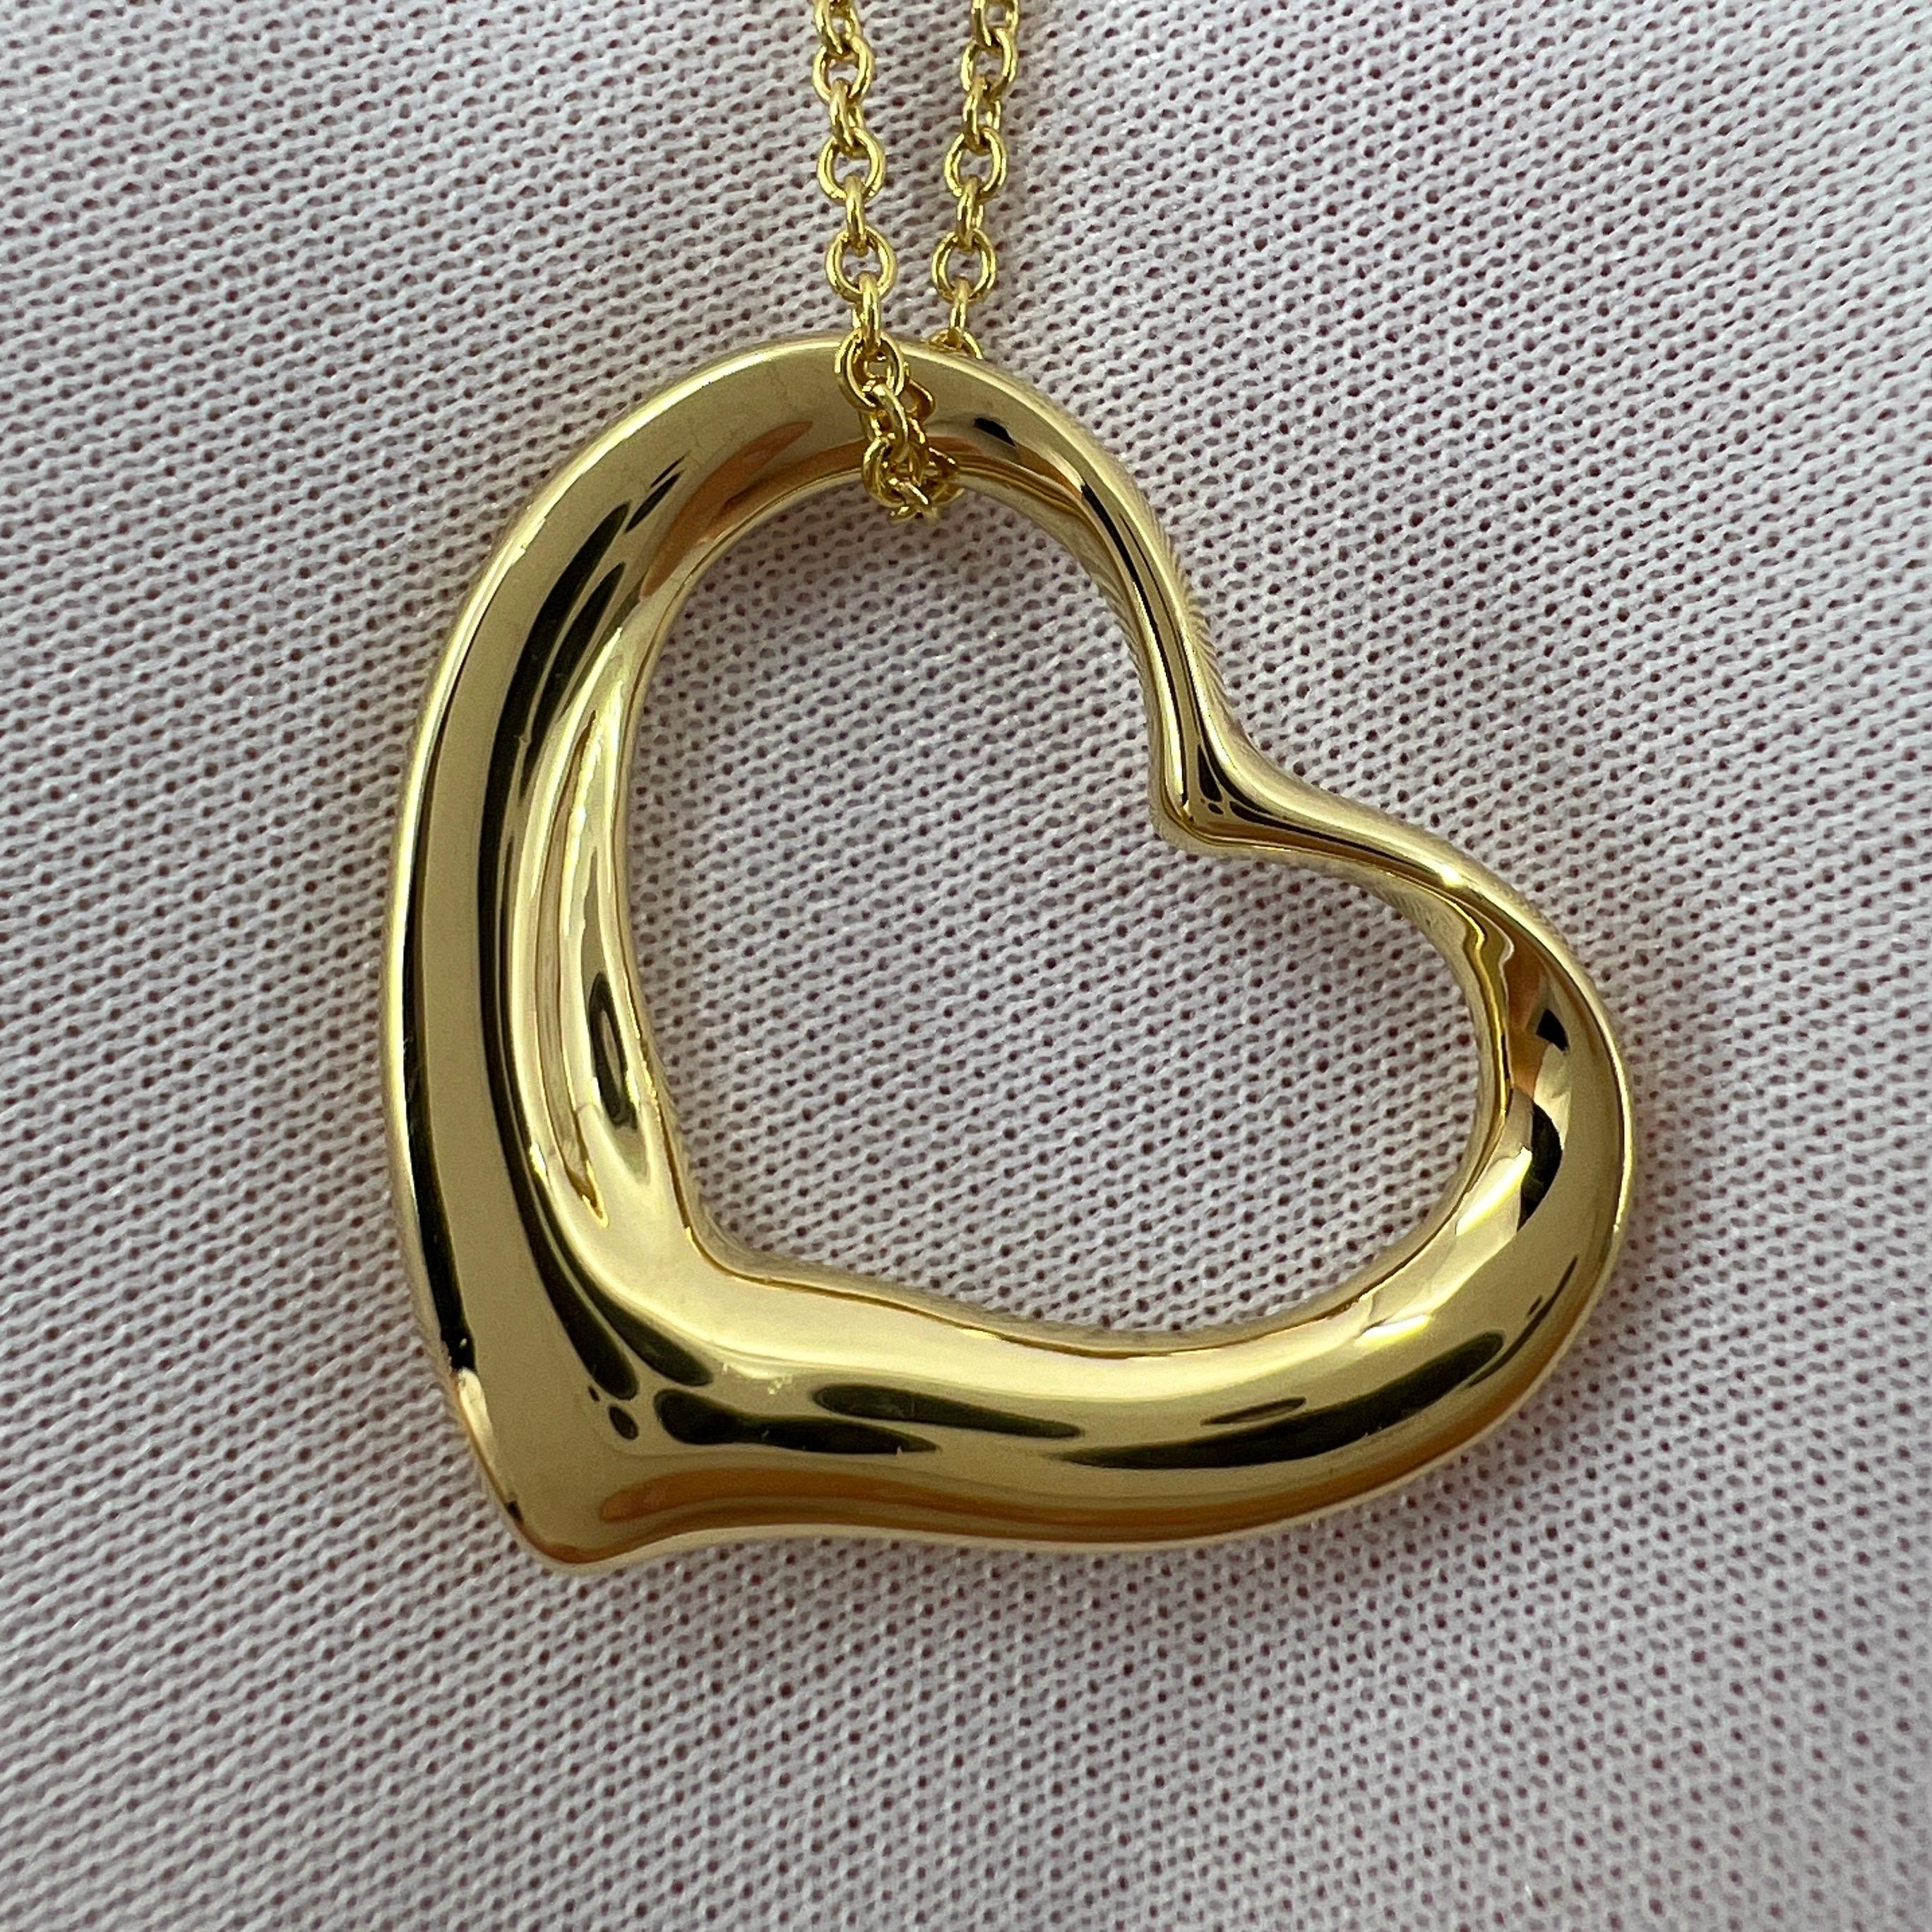 Tiffany & Co. Elsa Peretti Extra Large Open Heart 18k Gold Pendant Necklace For Sale 3